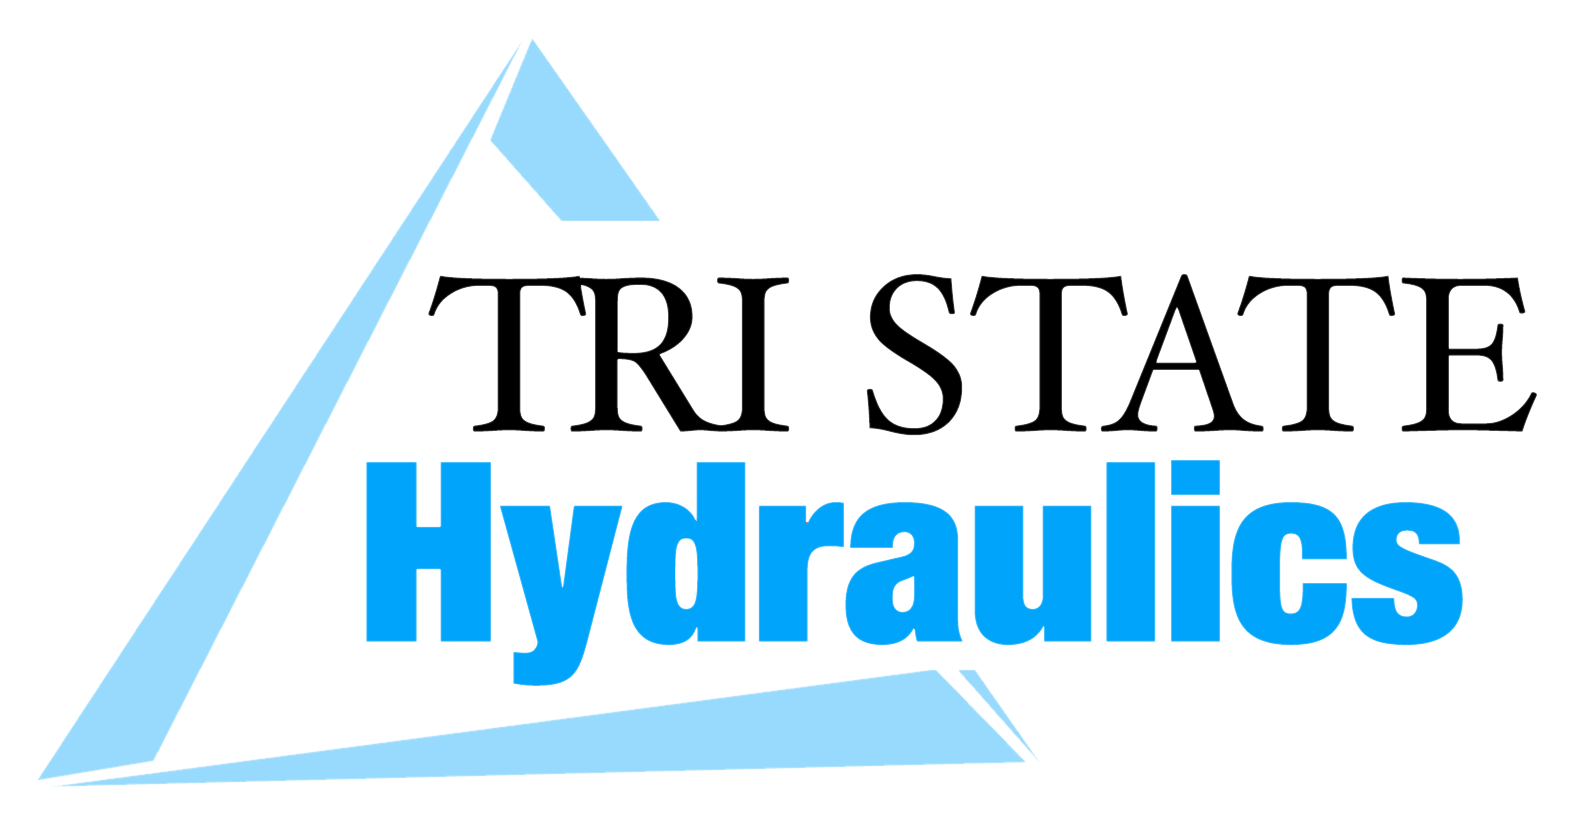 Tri-State Logo - Welcome to Tri State Hydraulics